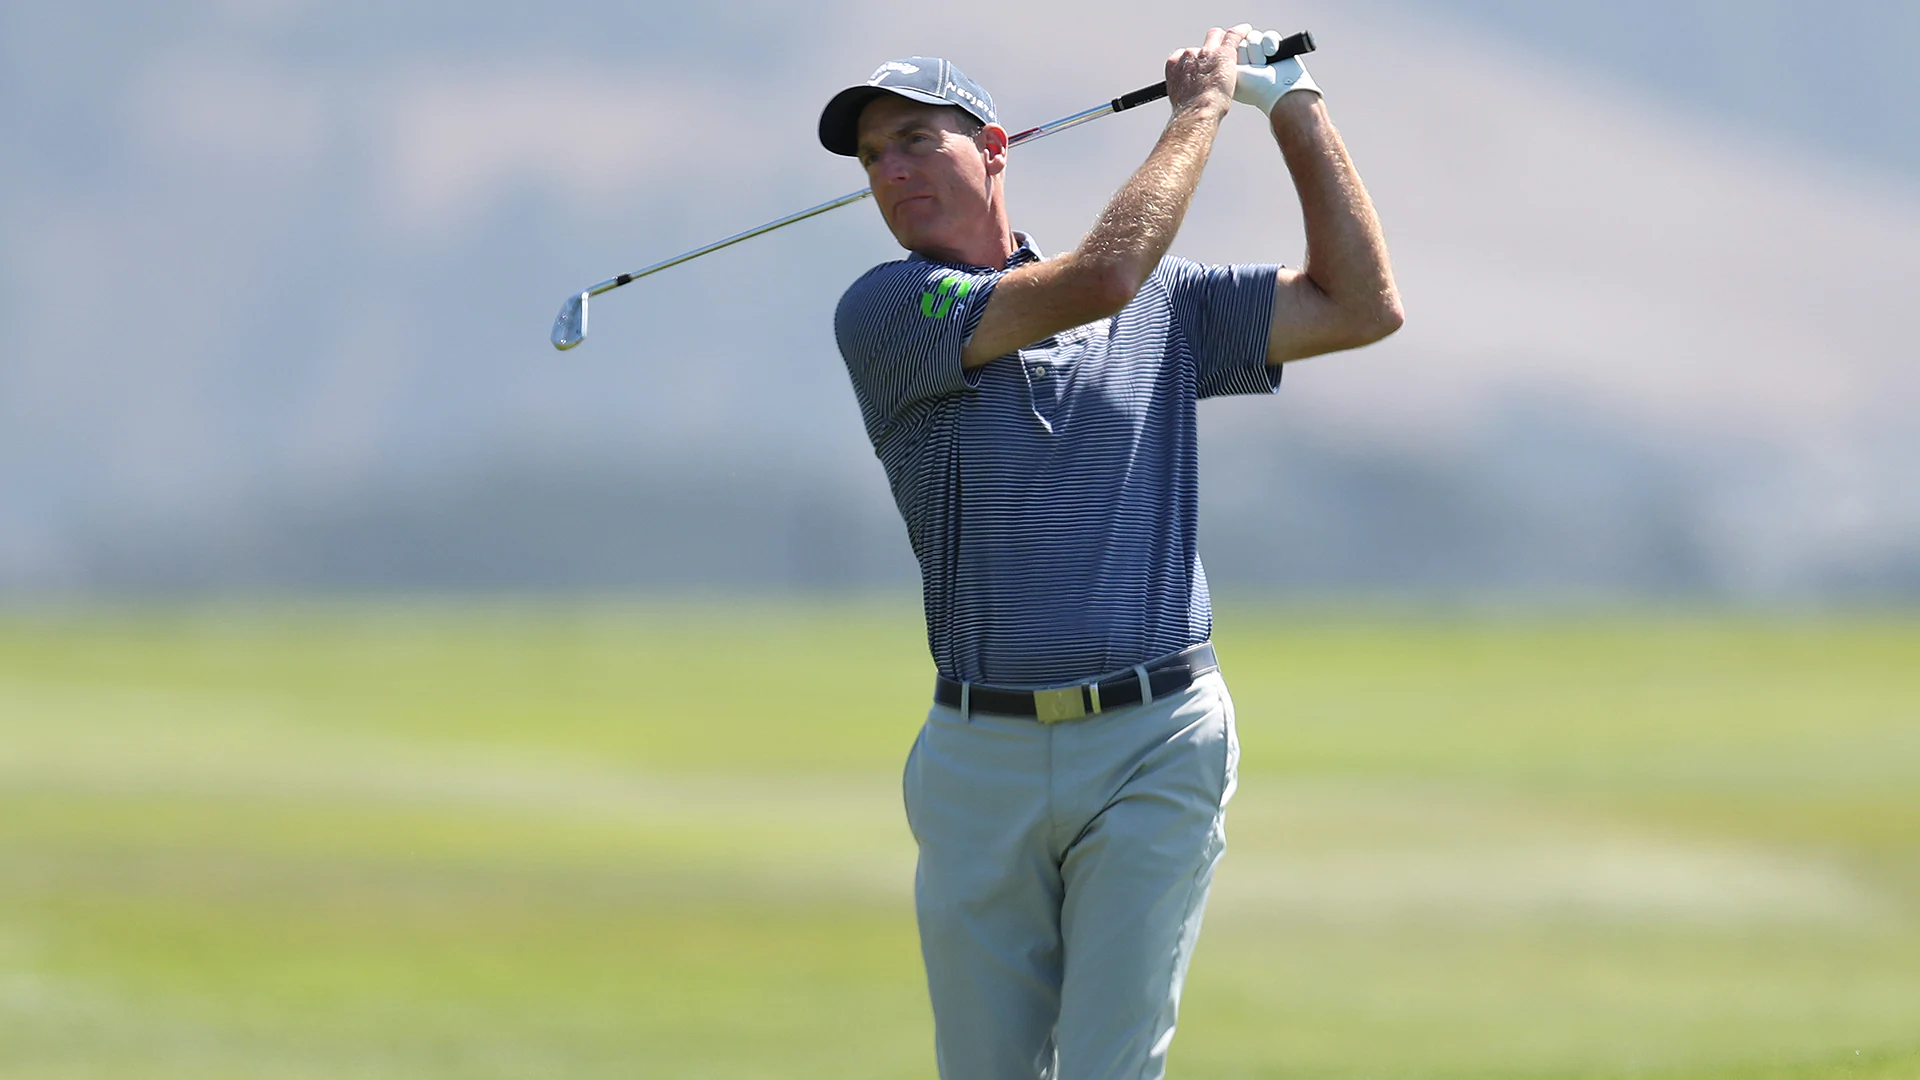 Jim Furyk leads at Pebble Beach in search of going 2-for-2 on PGA Tour Champions